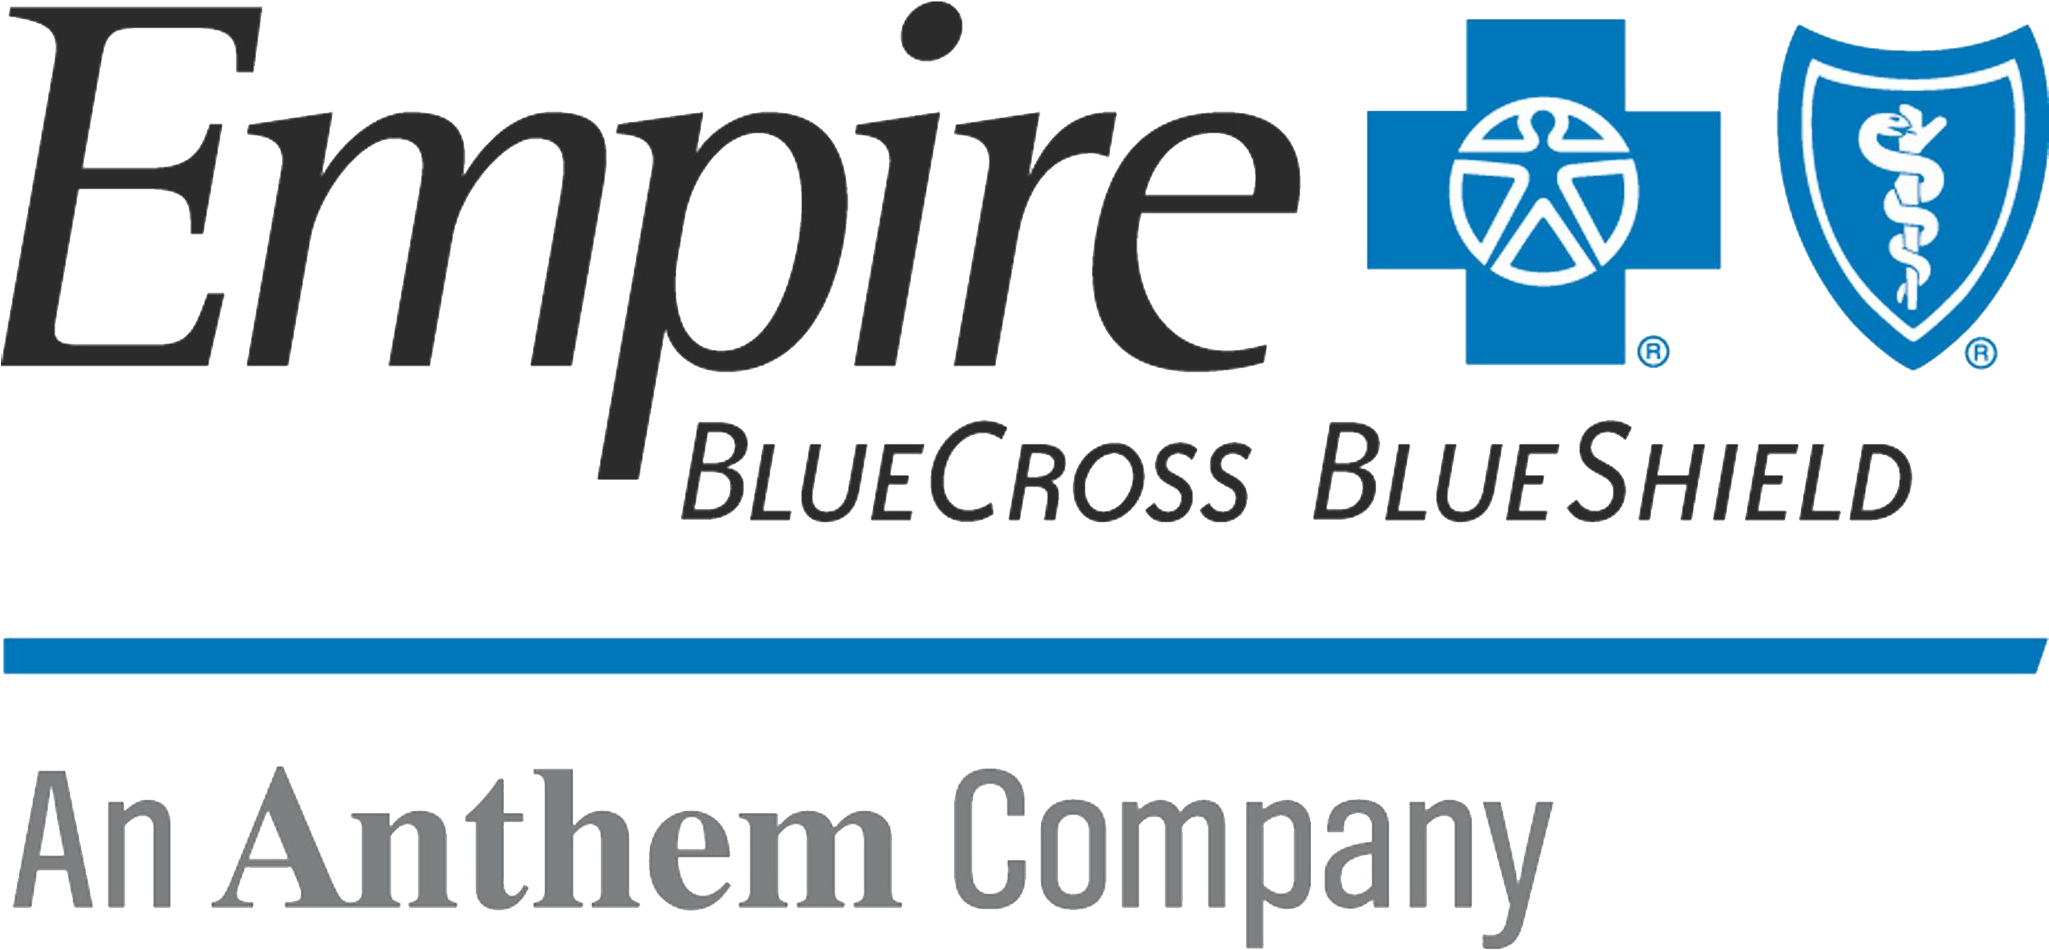 These Are Just Some Of The Carriers With Whom We Write - Empire Blue Cross Blue Shield Logo (2048x973)